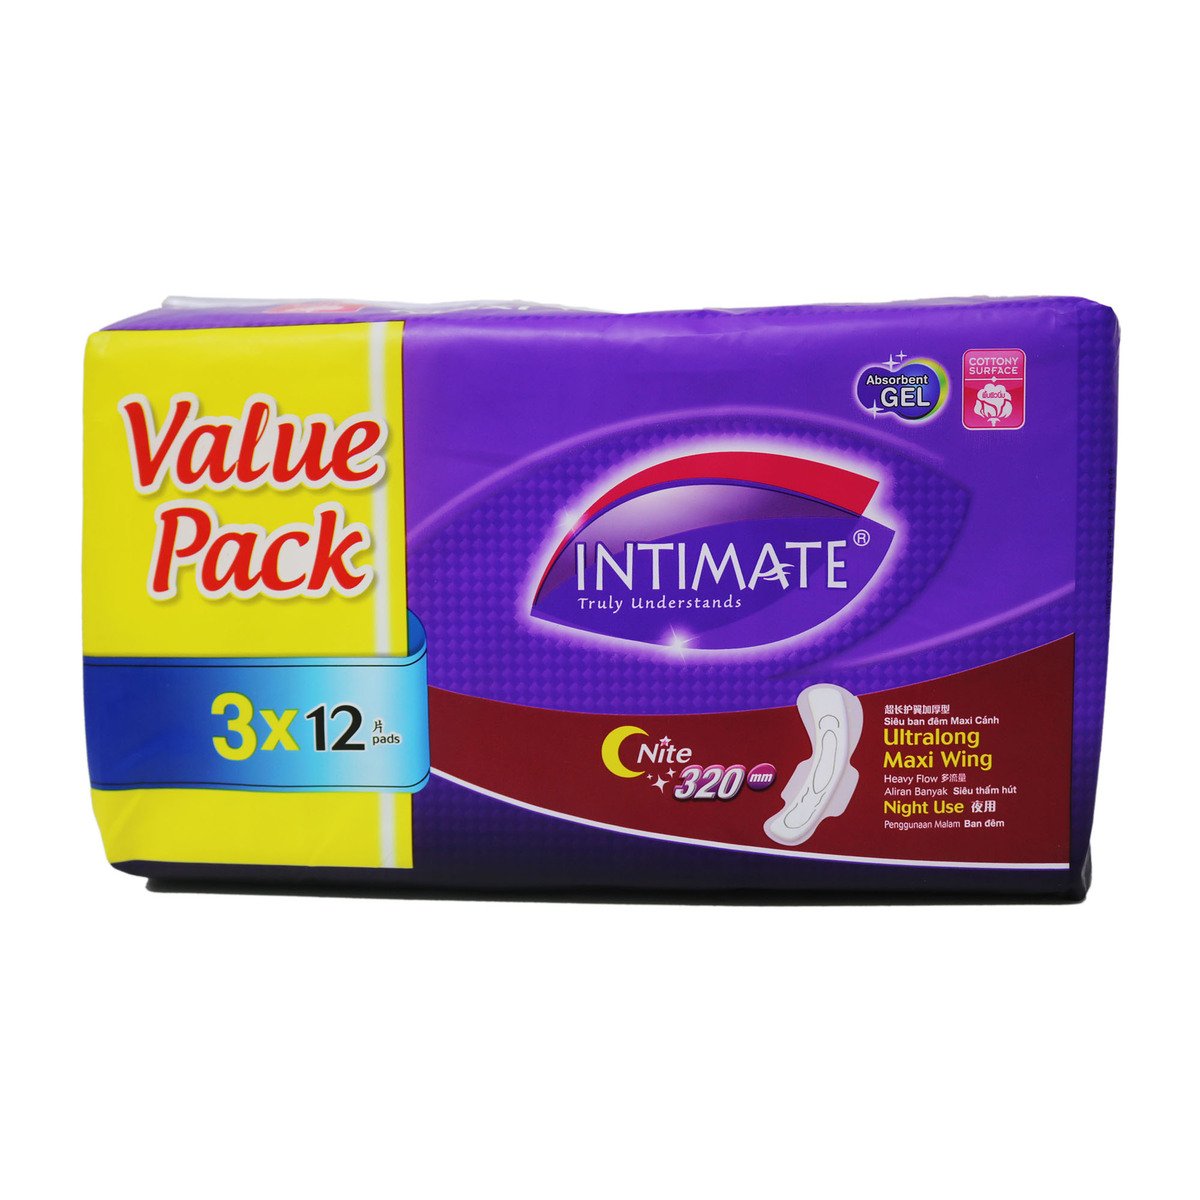 Intimate Night Long Maxi Wing Cottony Surface 320mm 3 x 12 Counts